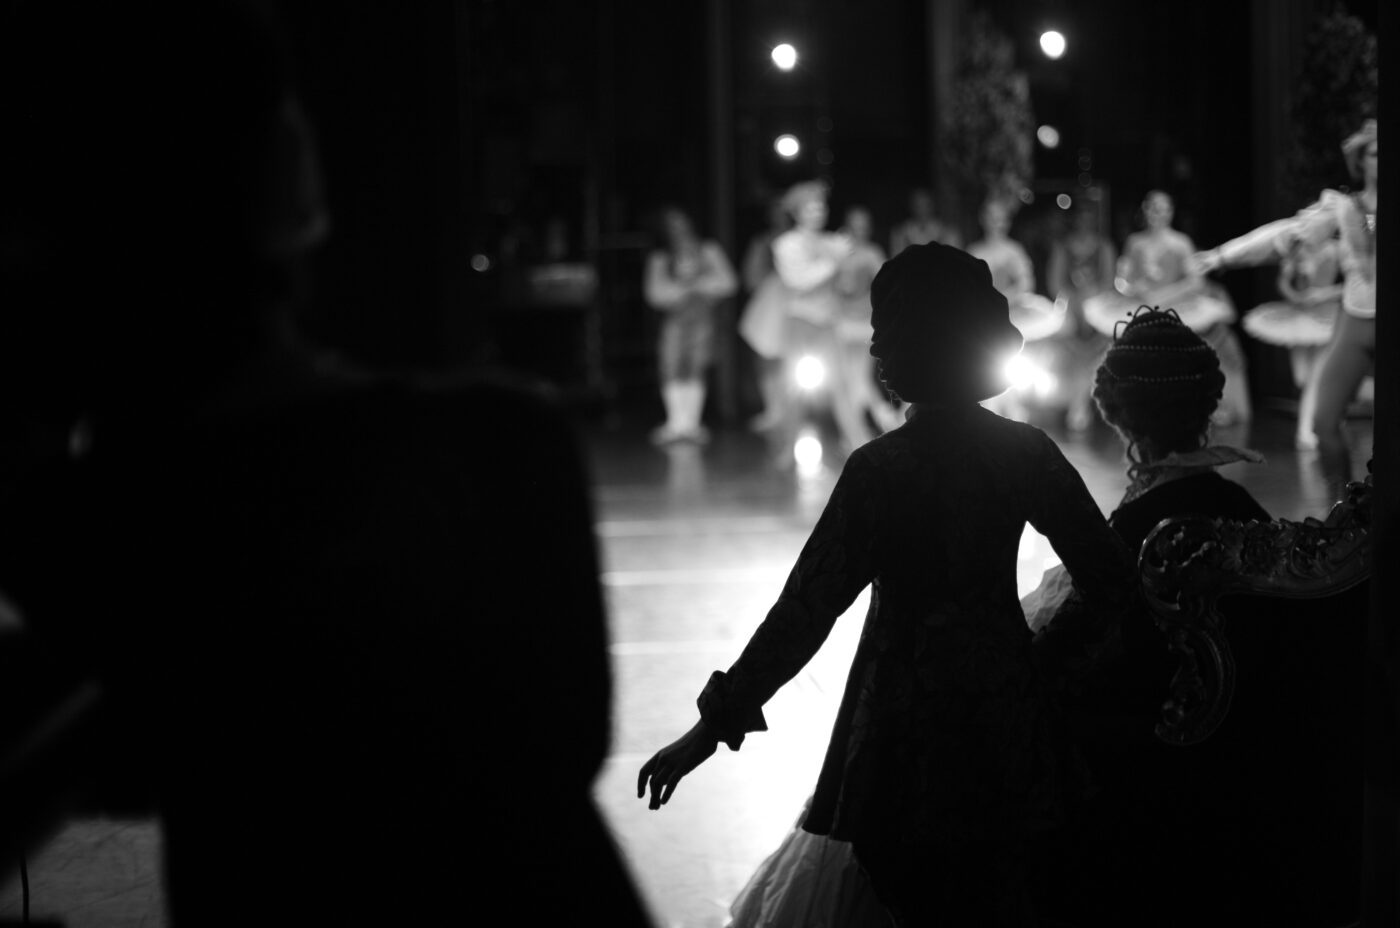 Silhouettes of actors waiting in the wings at Wicked the musical